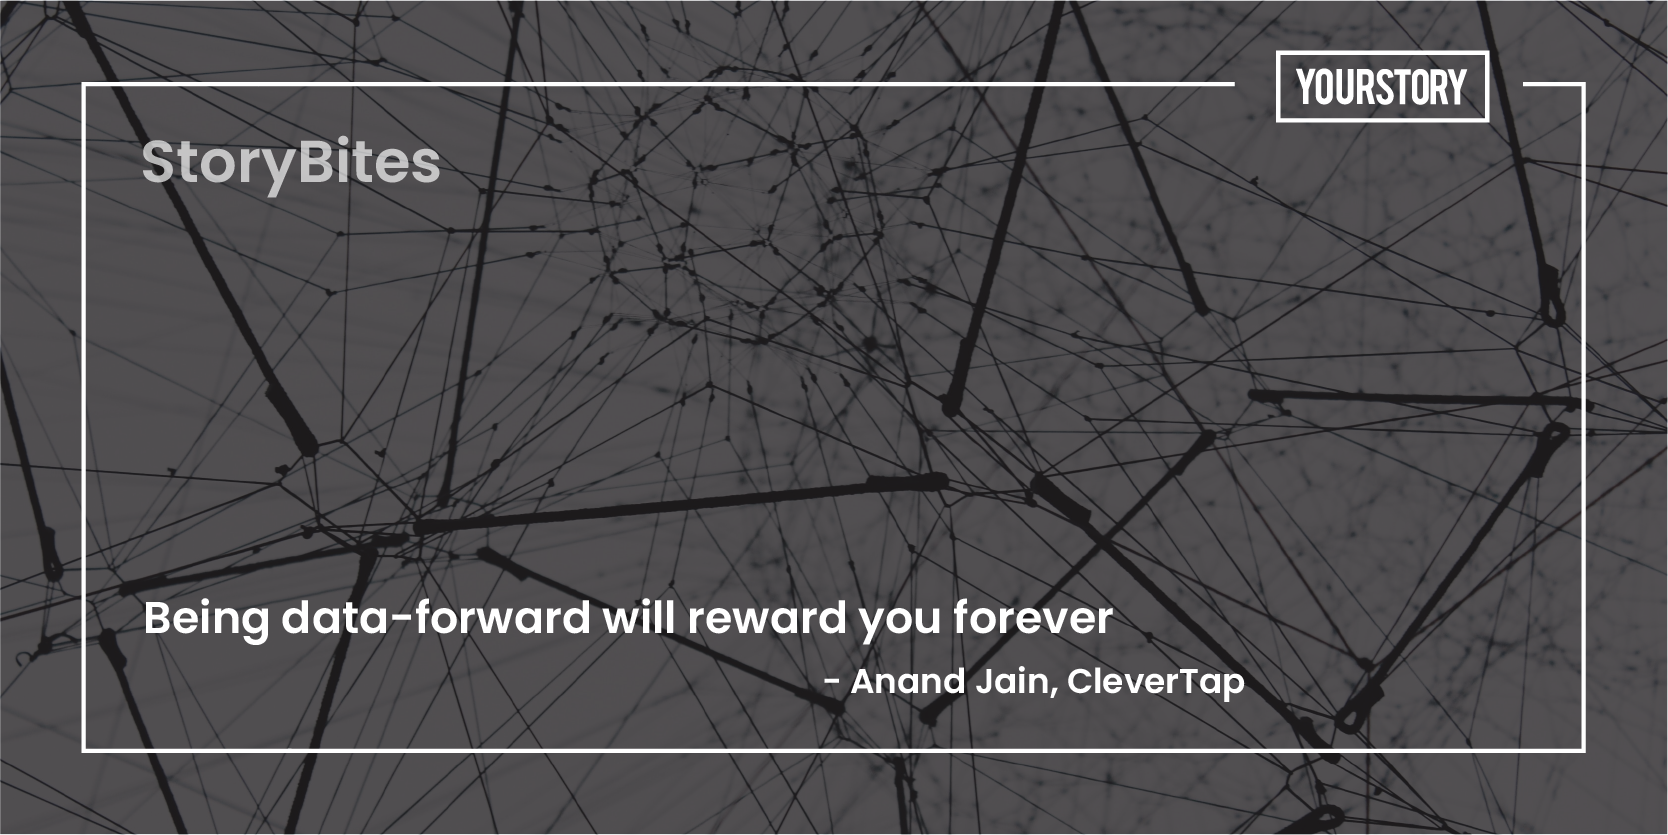 ‘Being data-forward will reward you forever’ – 20 quotes of the week on digital transformation